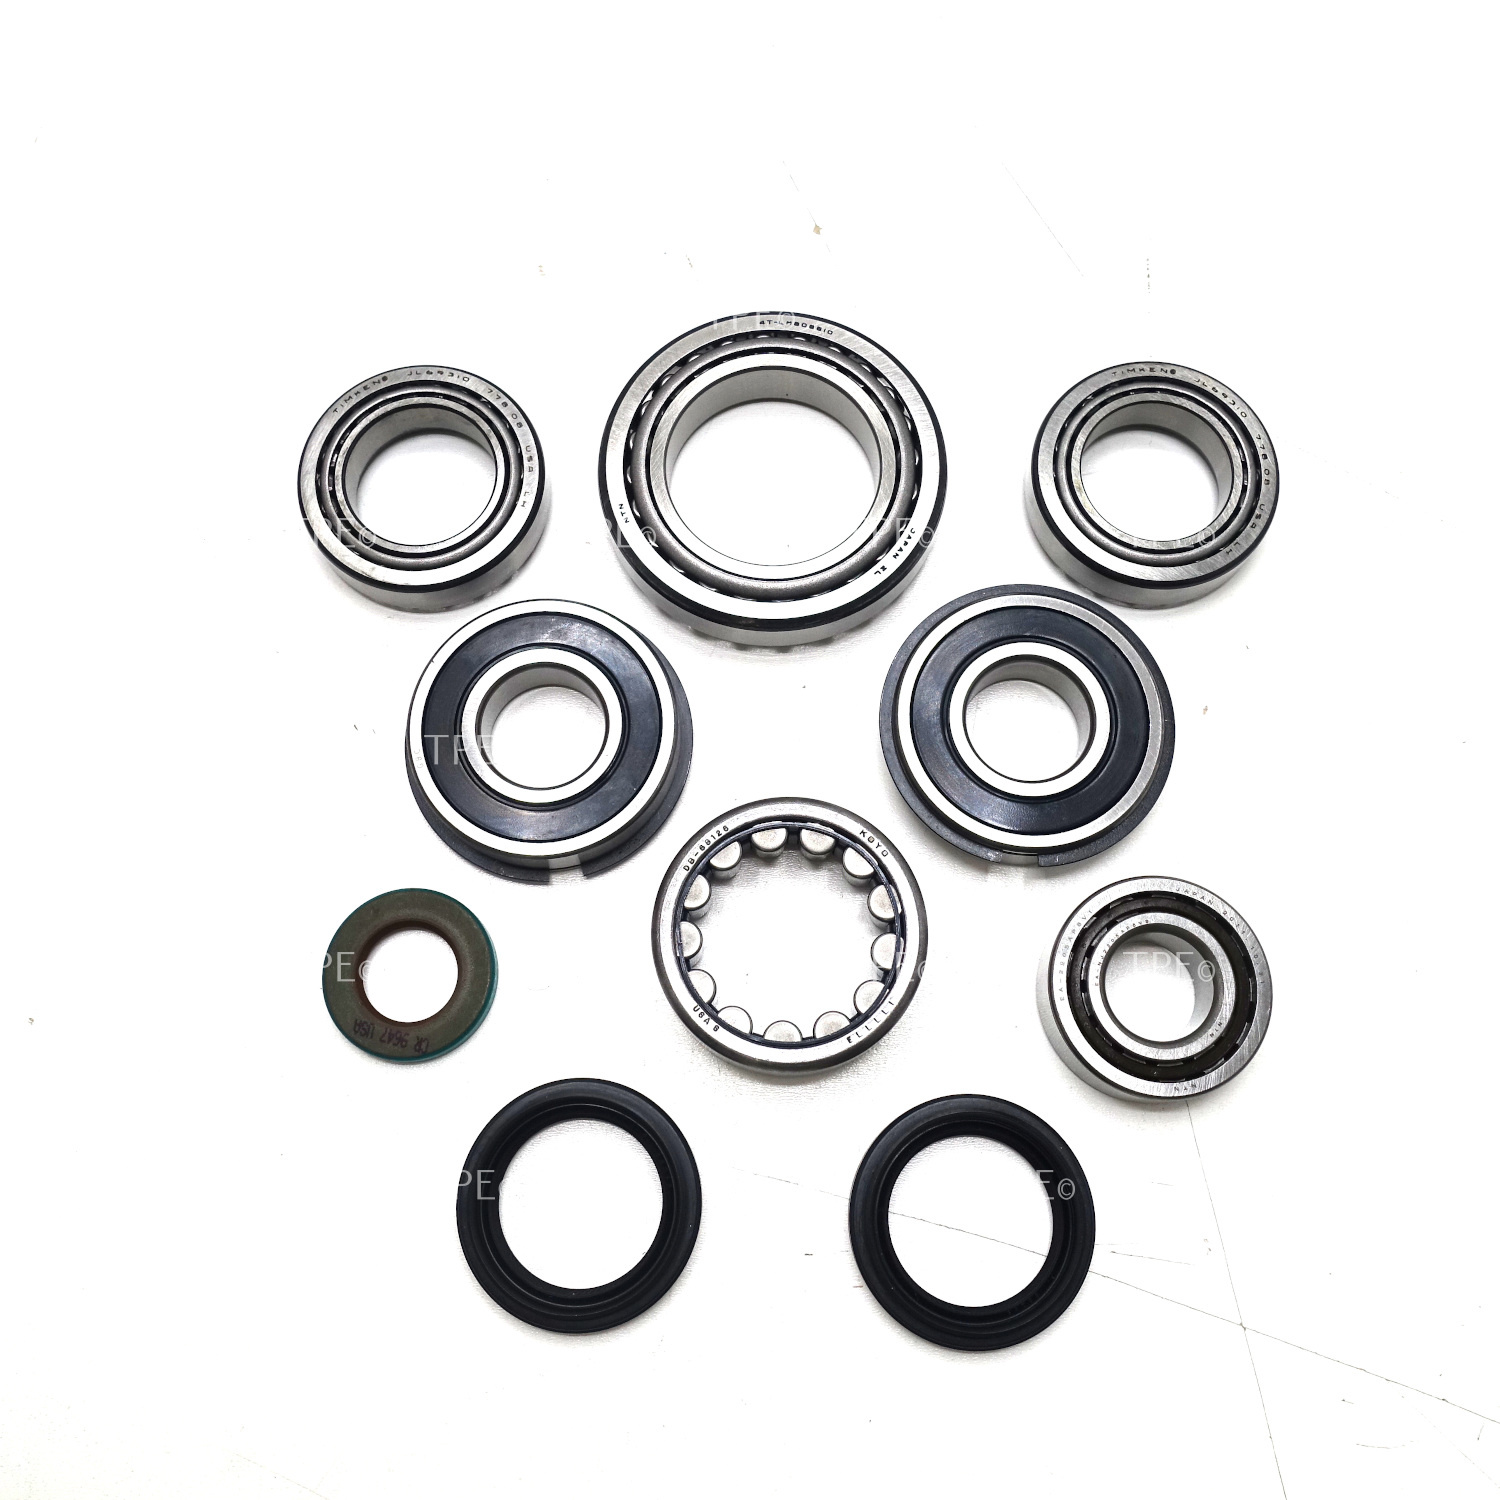 CH.KB.01 This Bearing & Seal Kit contains the following Parts:

• 7 Bearings
• 1 Input Seal
• 2 Differential Seals